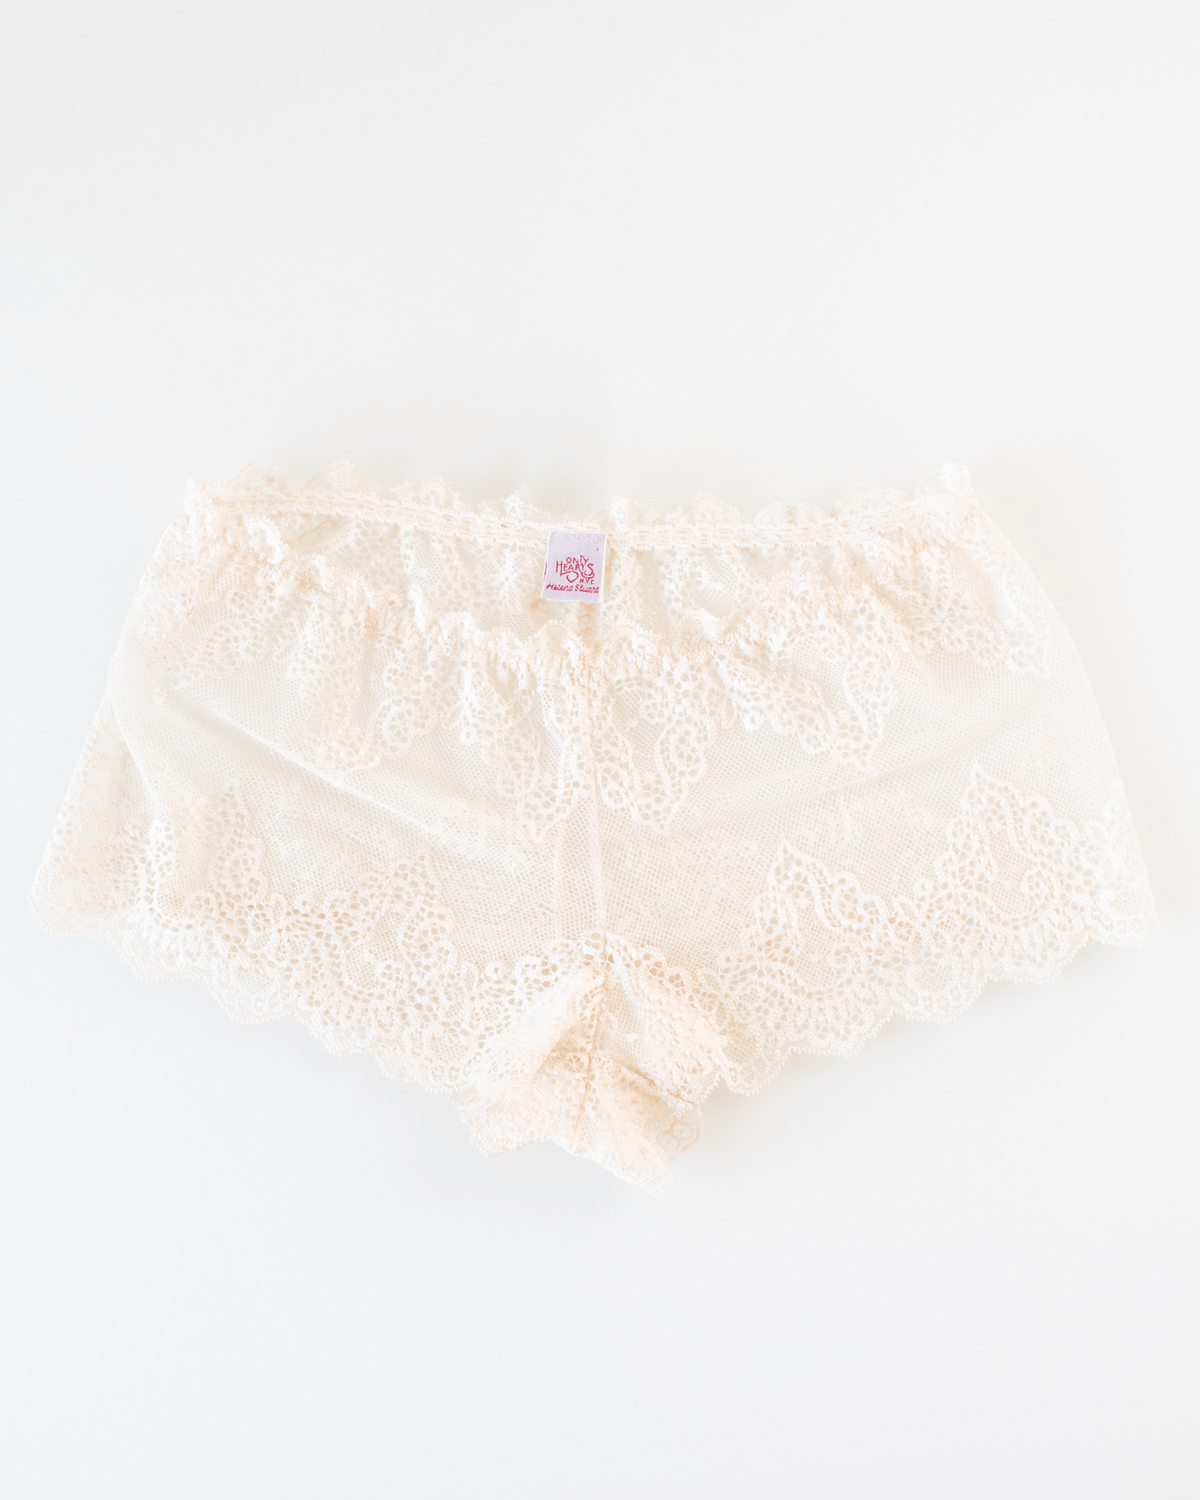 Only Hearts Lingerie SF w/ Lace Hipster in Bone